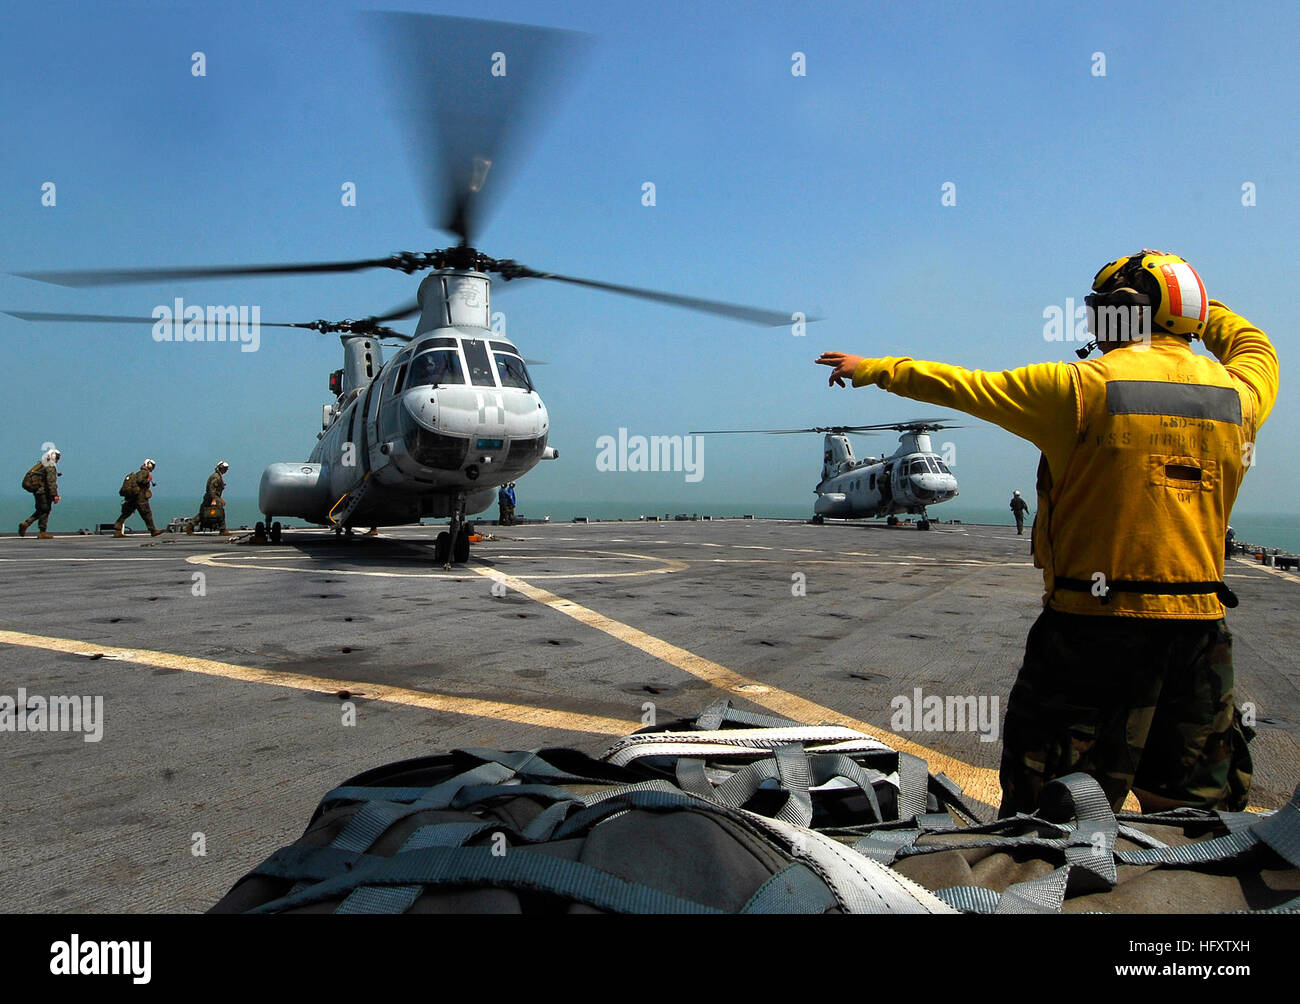 091011-N-0807W-021  SOUTH CHINA SEA (Oct. 11, 2009) Boatswain's Mate 3rd Class Kyle E. Eggering directs Navy and Marine Corps personnel aboard a Marine Corps CH-46 helicopter during flight operations aboard the the amphibious dock landing ship USS Harpers Ferry (LSD 49). Harpers Ferry, the amphibious dock  landing ship USS Tortuga (LSD 46) and the 31st Marine Expeditionary Unit (MEU) are supporting humanitarian assistance operations at the request of the Republic of the Philippines in the wake of Typhoon Parma. (U.S. Navy photo by Mass Communication Specialist 2nd Class Joshua J. Wahl/Released Stock Photo